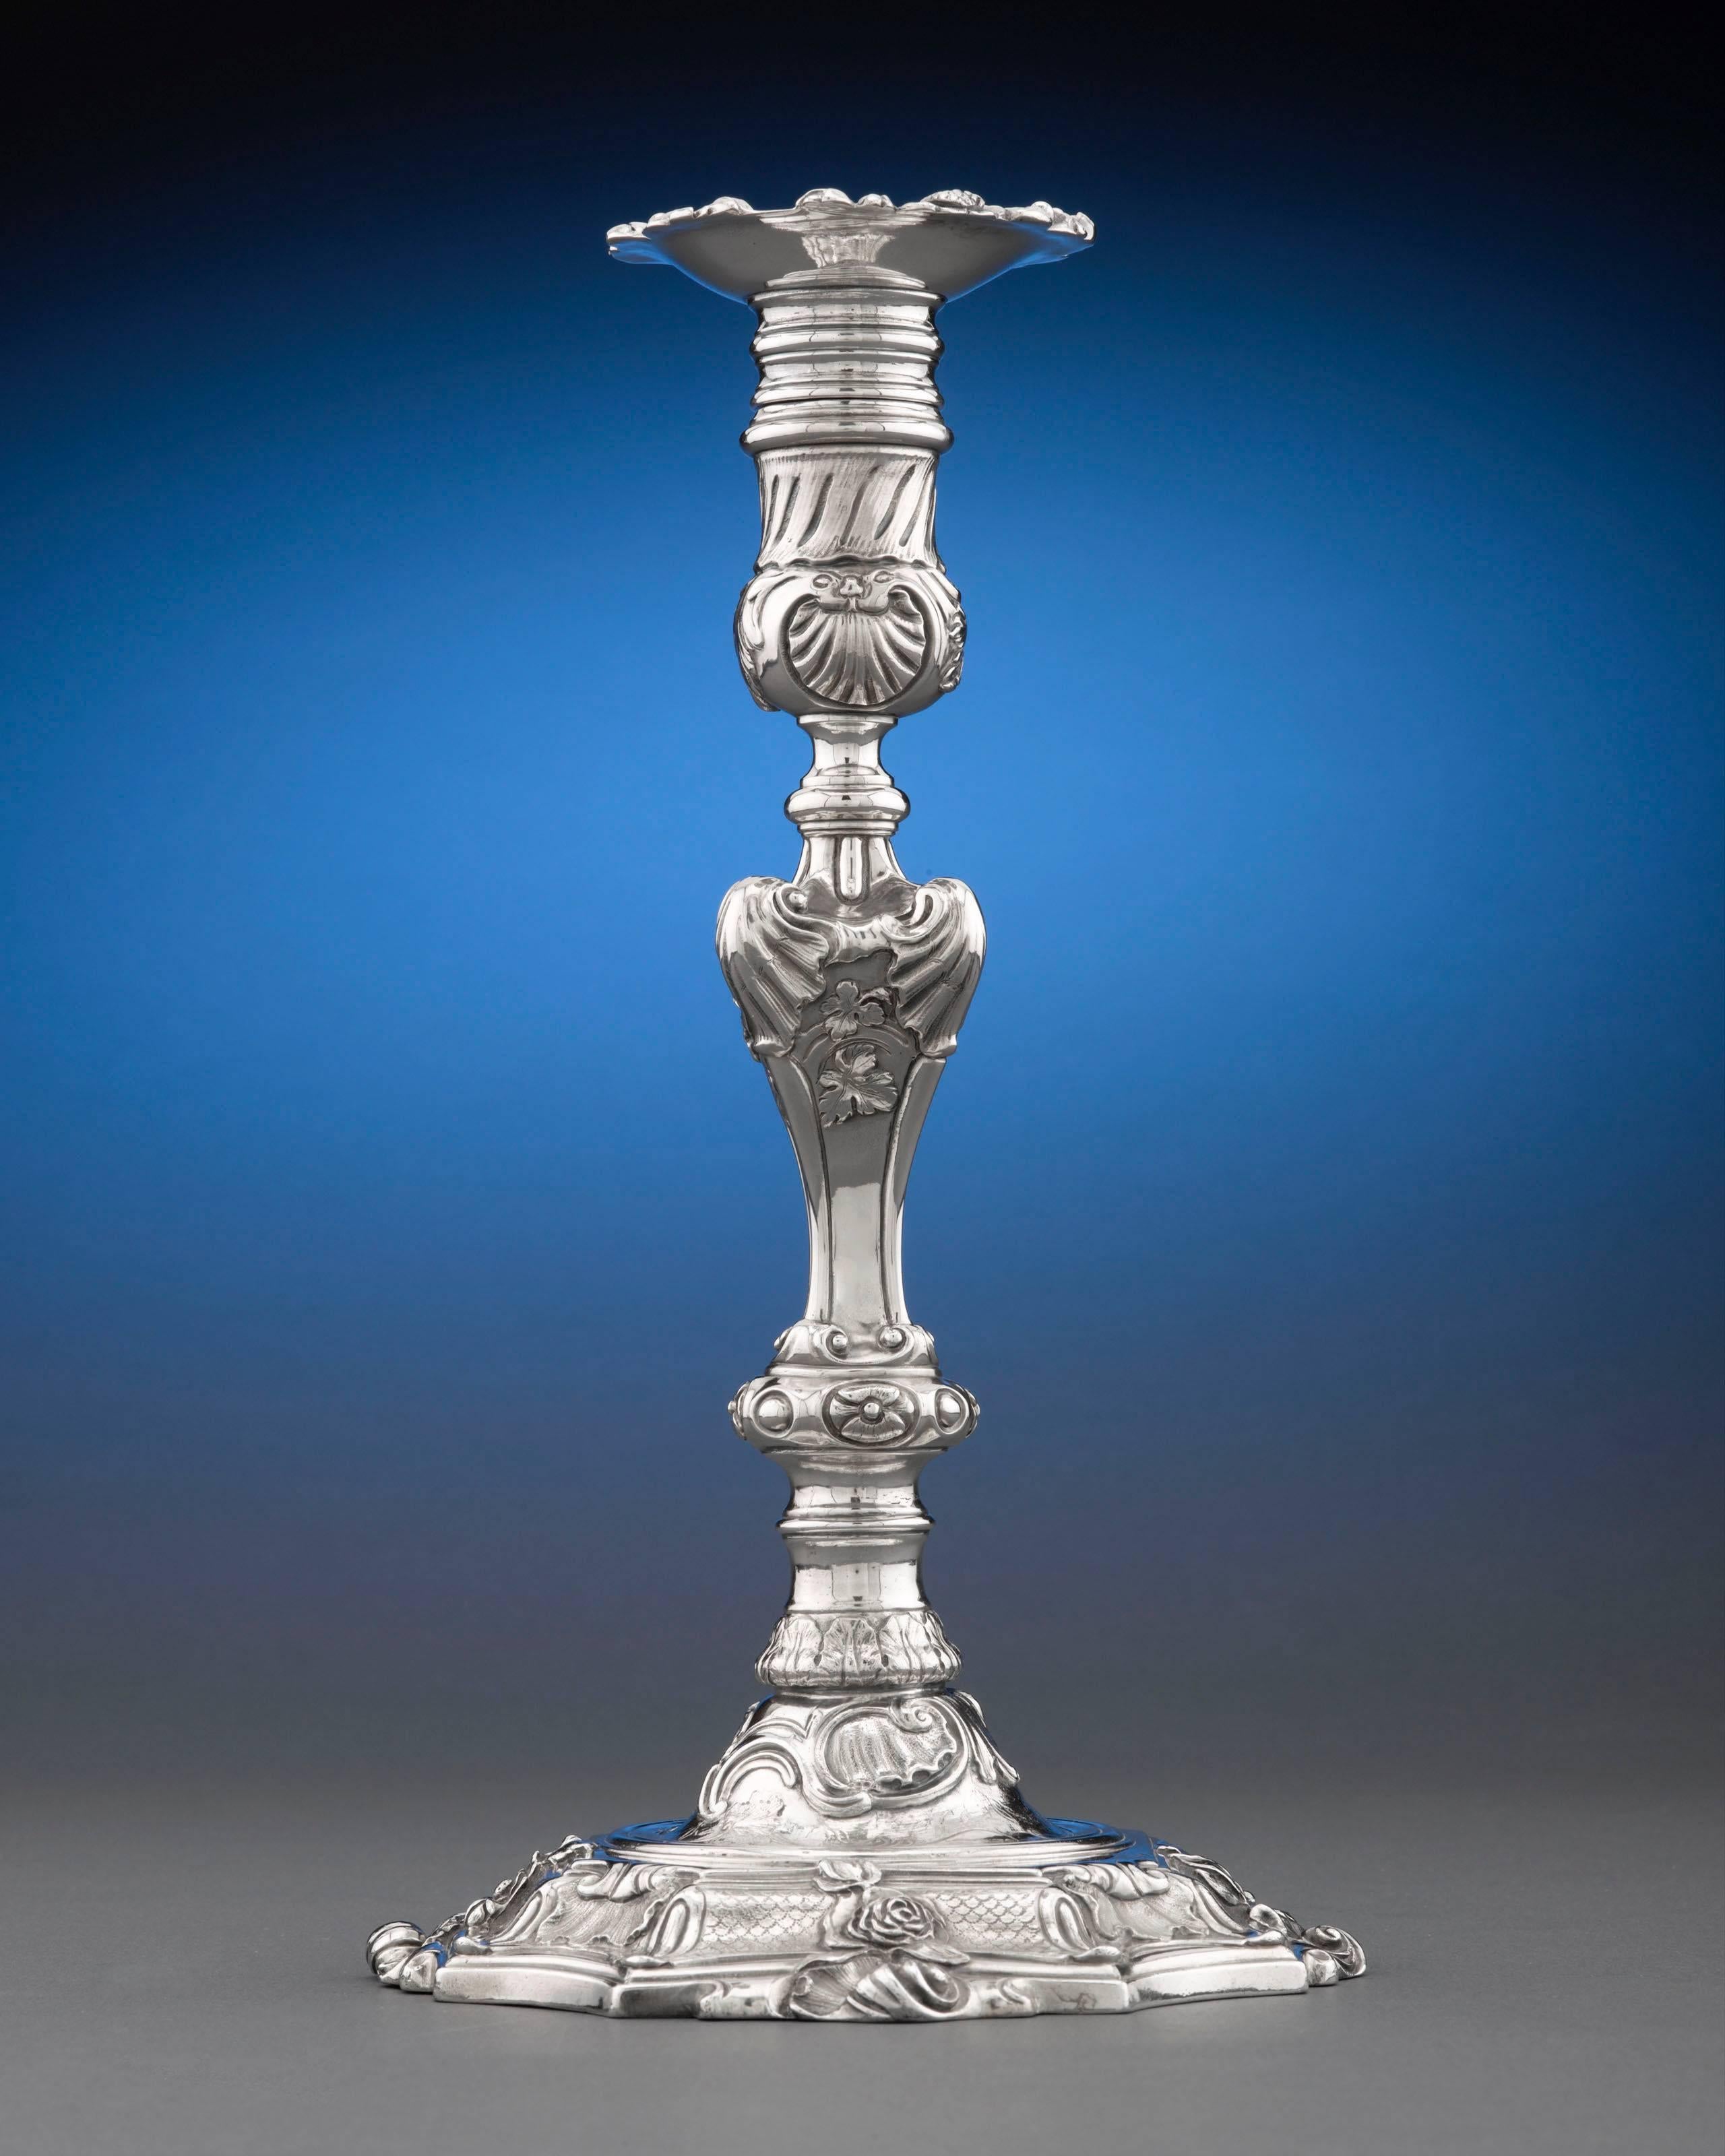 These spectacular George II-era silver candlesticks were created by celebrated English silversmith Paul de Lamerie. Made for a member of the notable Duncombe family of Yorkshire, these majestic candlesticks feature an elaborate Rococo motif that is